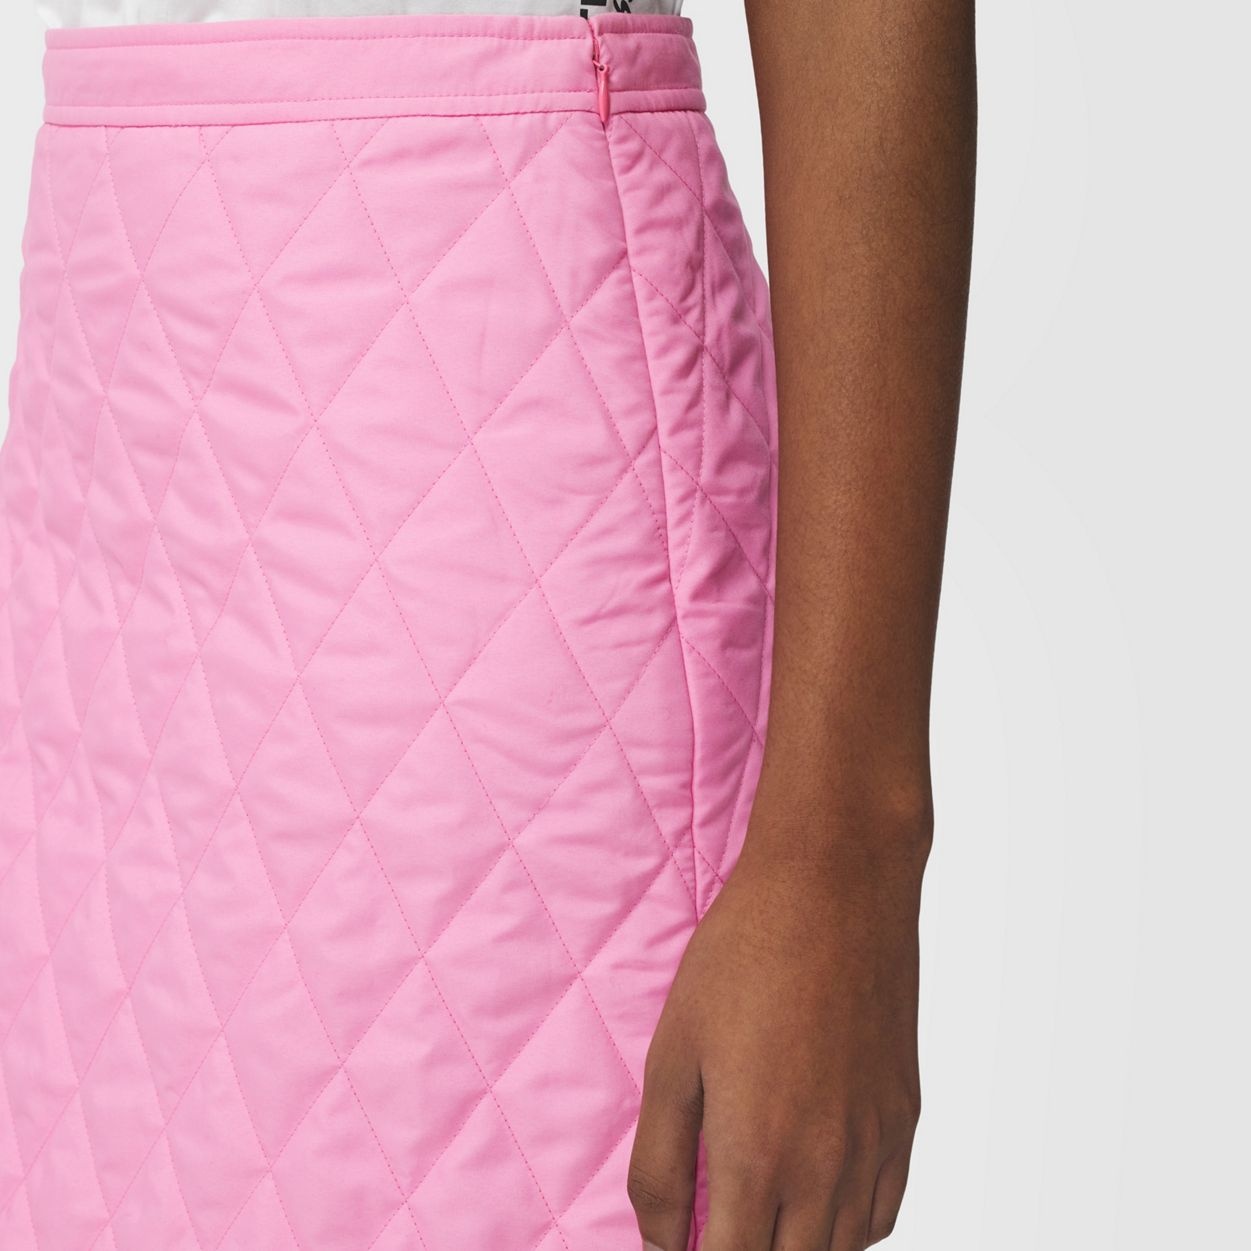 Diamond Quilted Skirt - 3